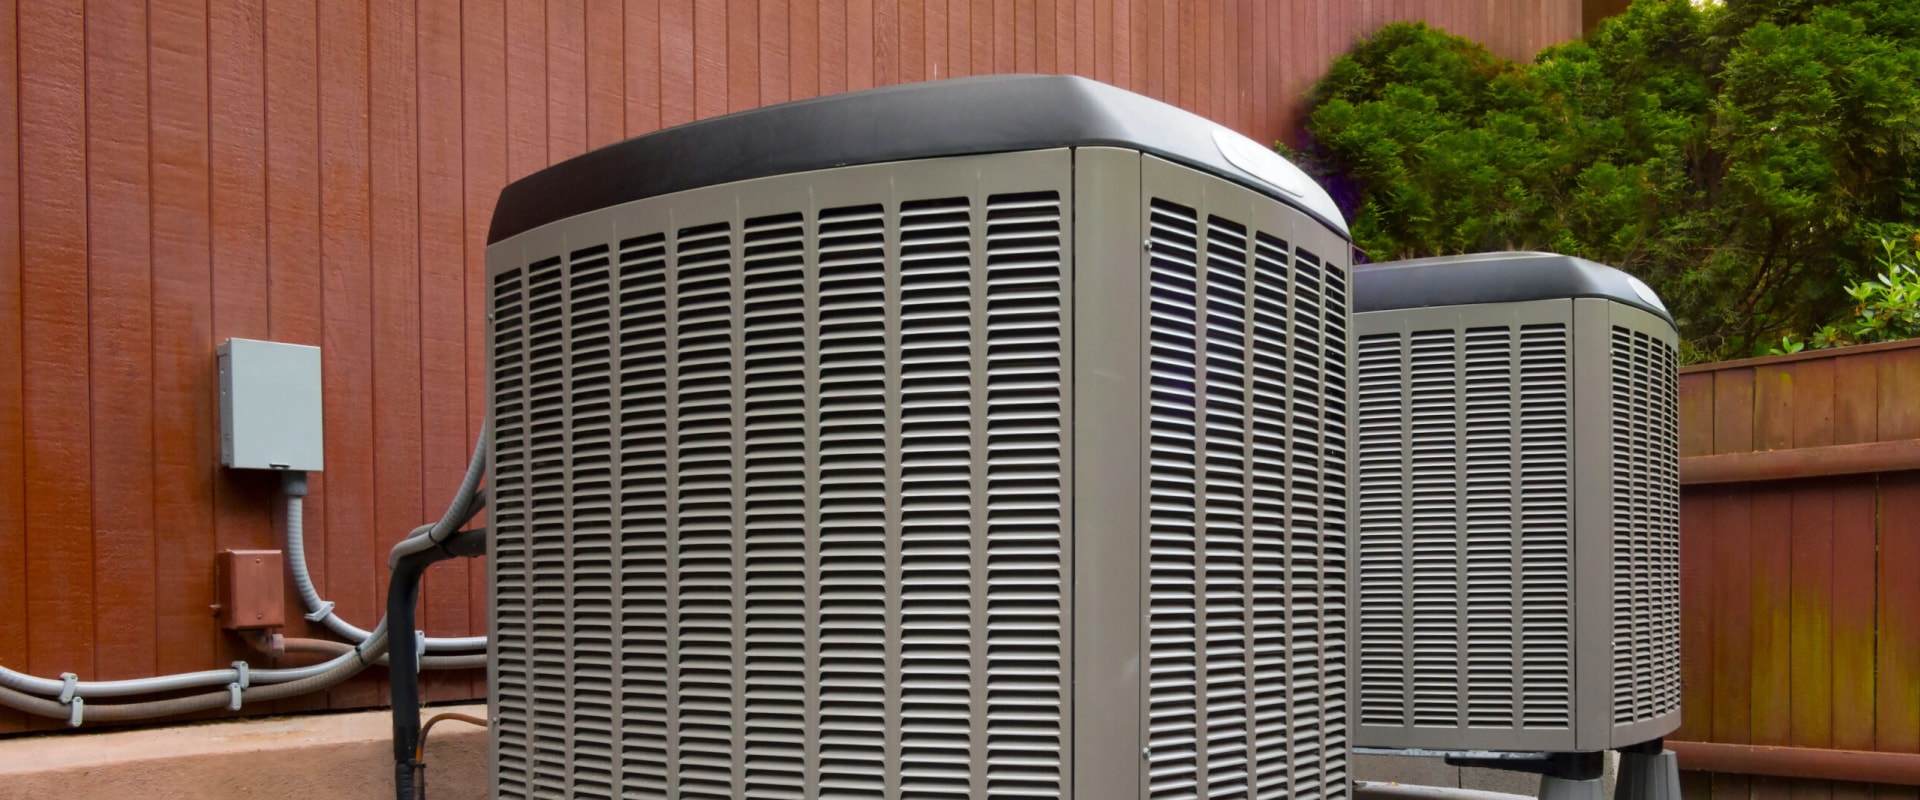 Why American Standard is the Most Reliable AC Brand